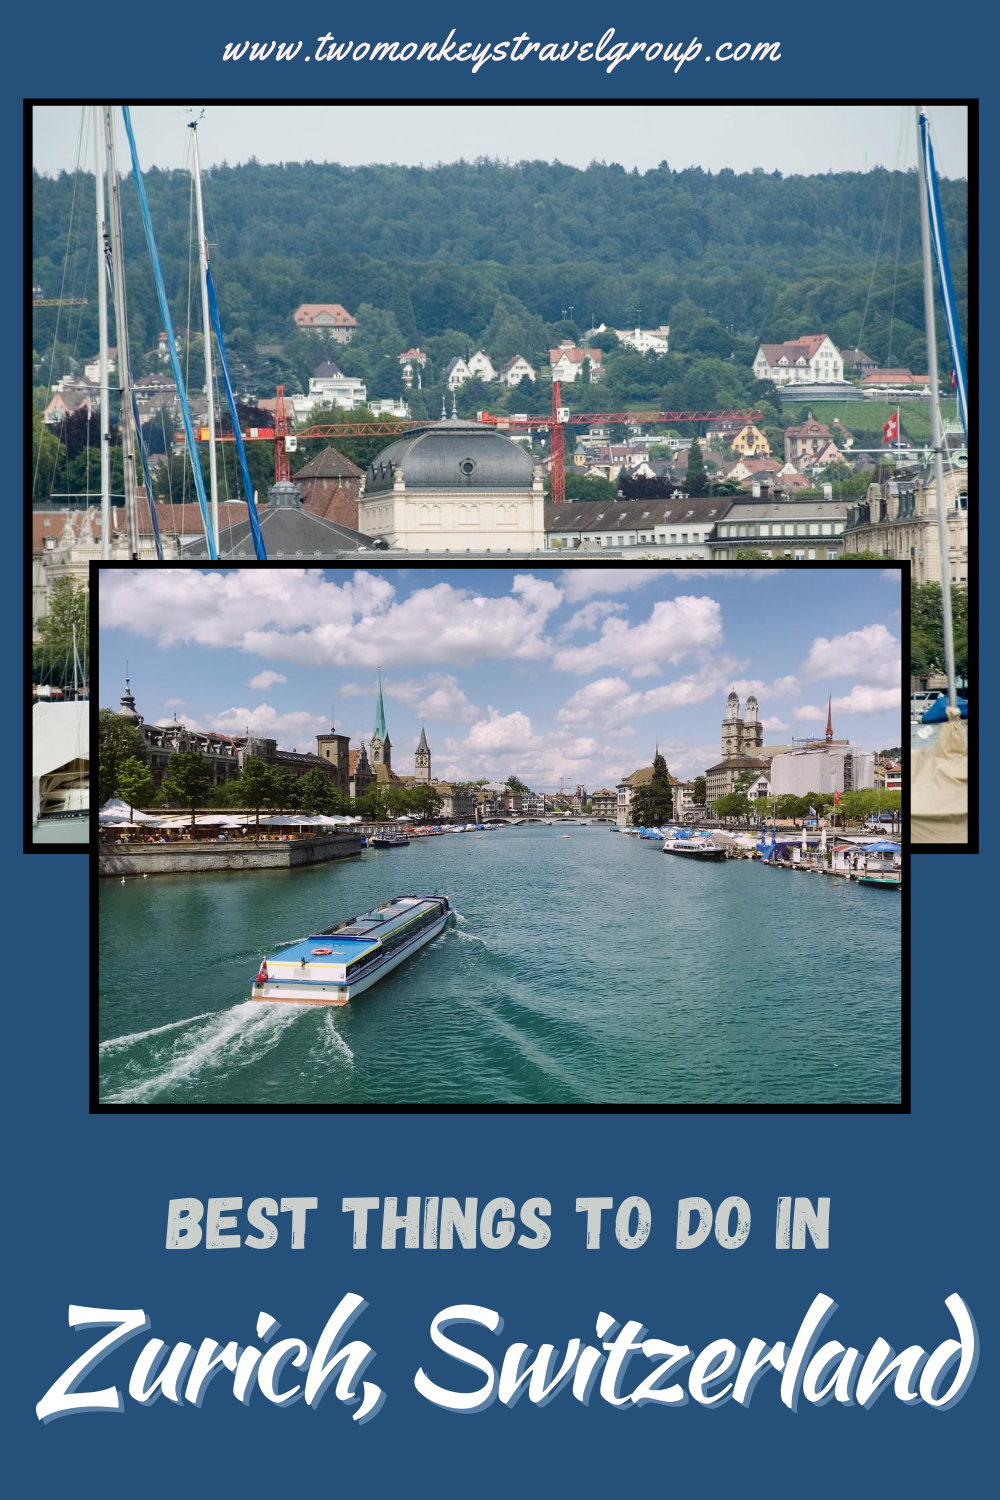 15 Best Things To Do in Zurich, Switzerland [With Suggested Day Trips]